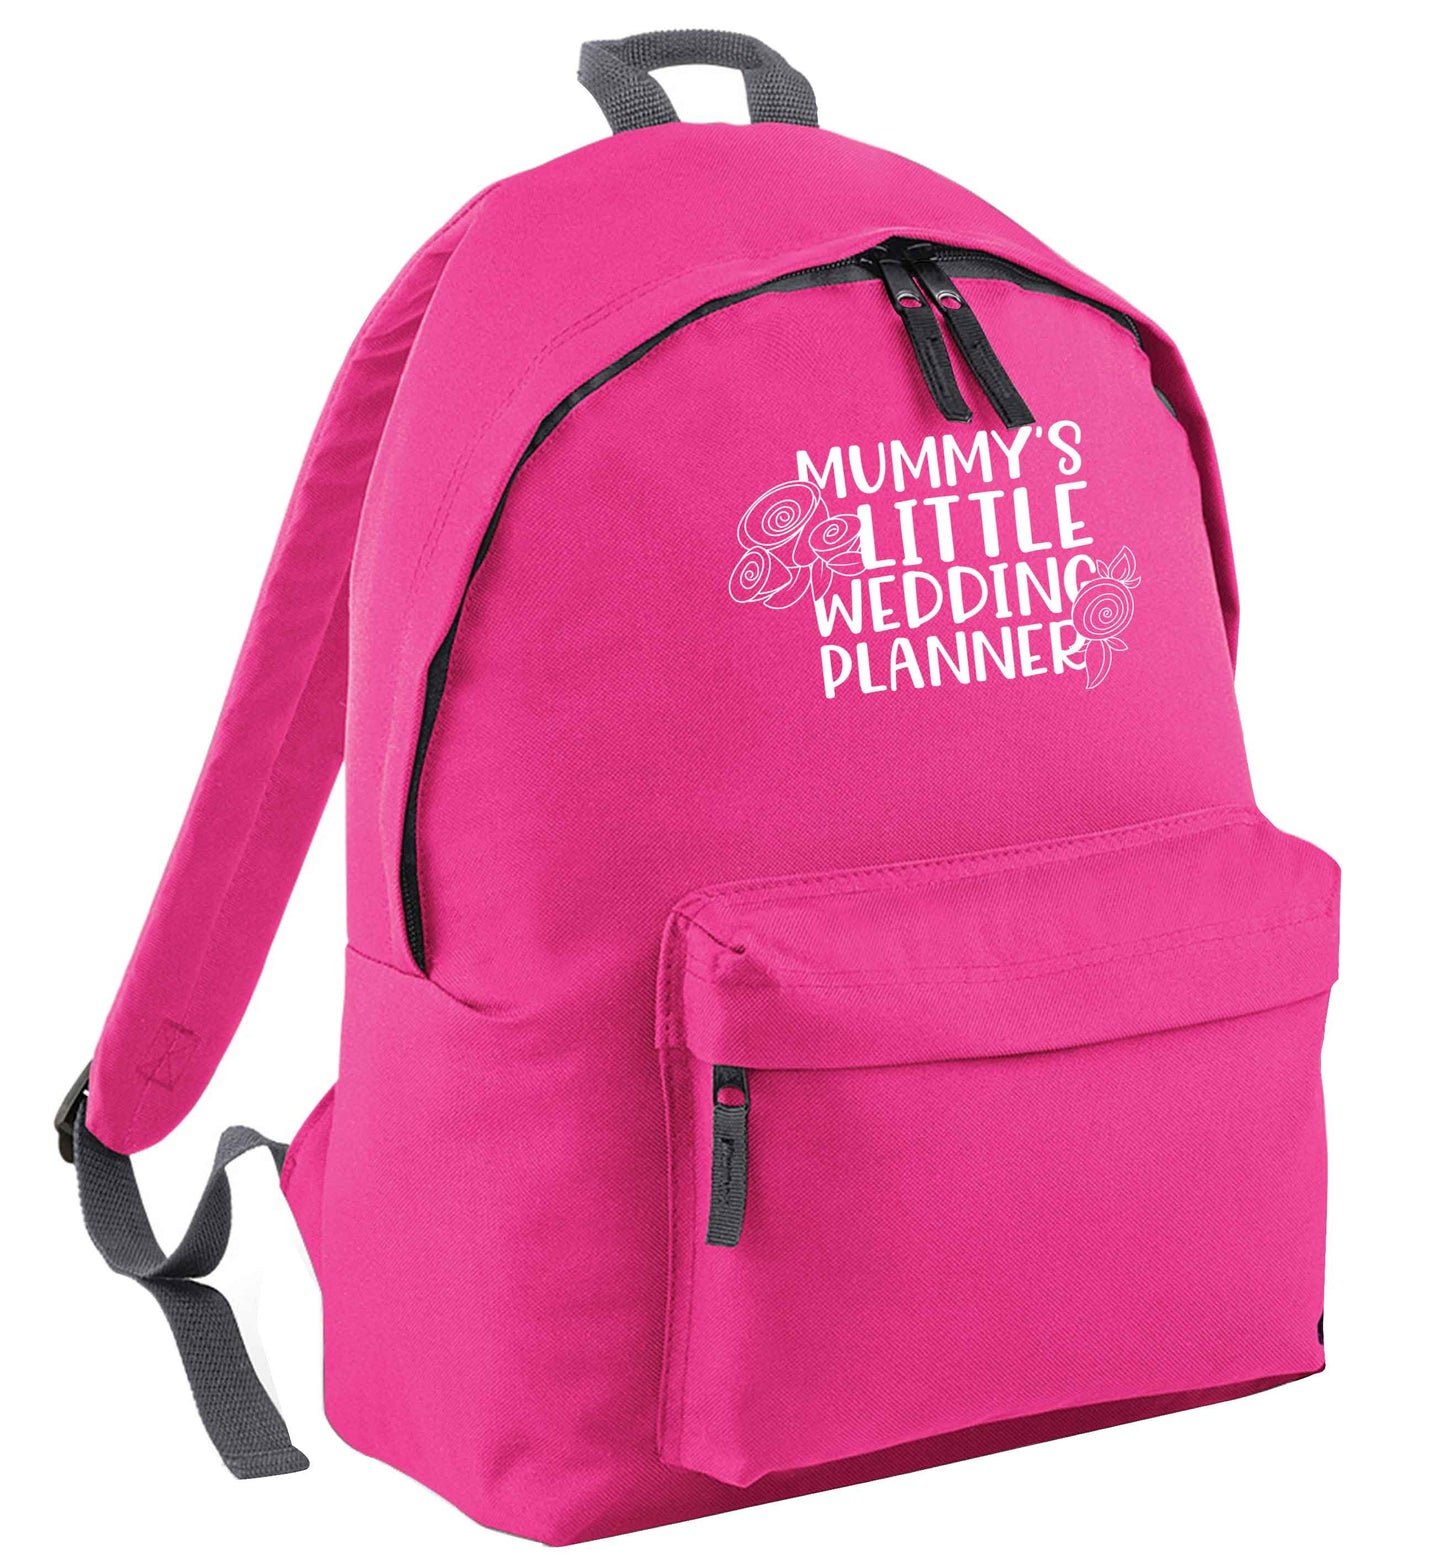 adorable wedding themed gifts for your mini wedding planner! | Children's backpack